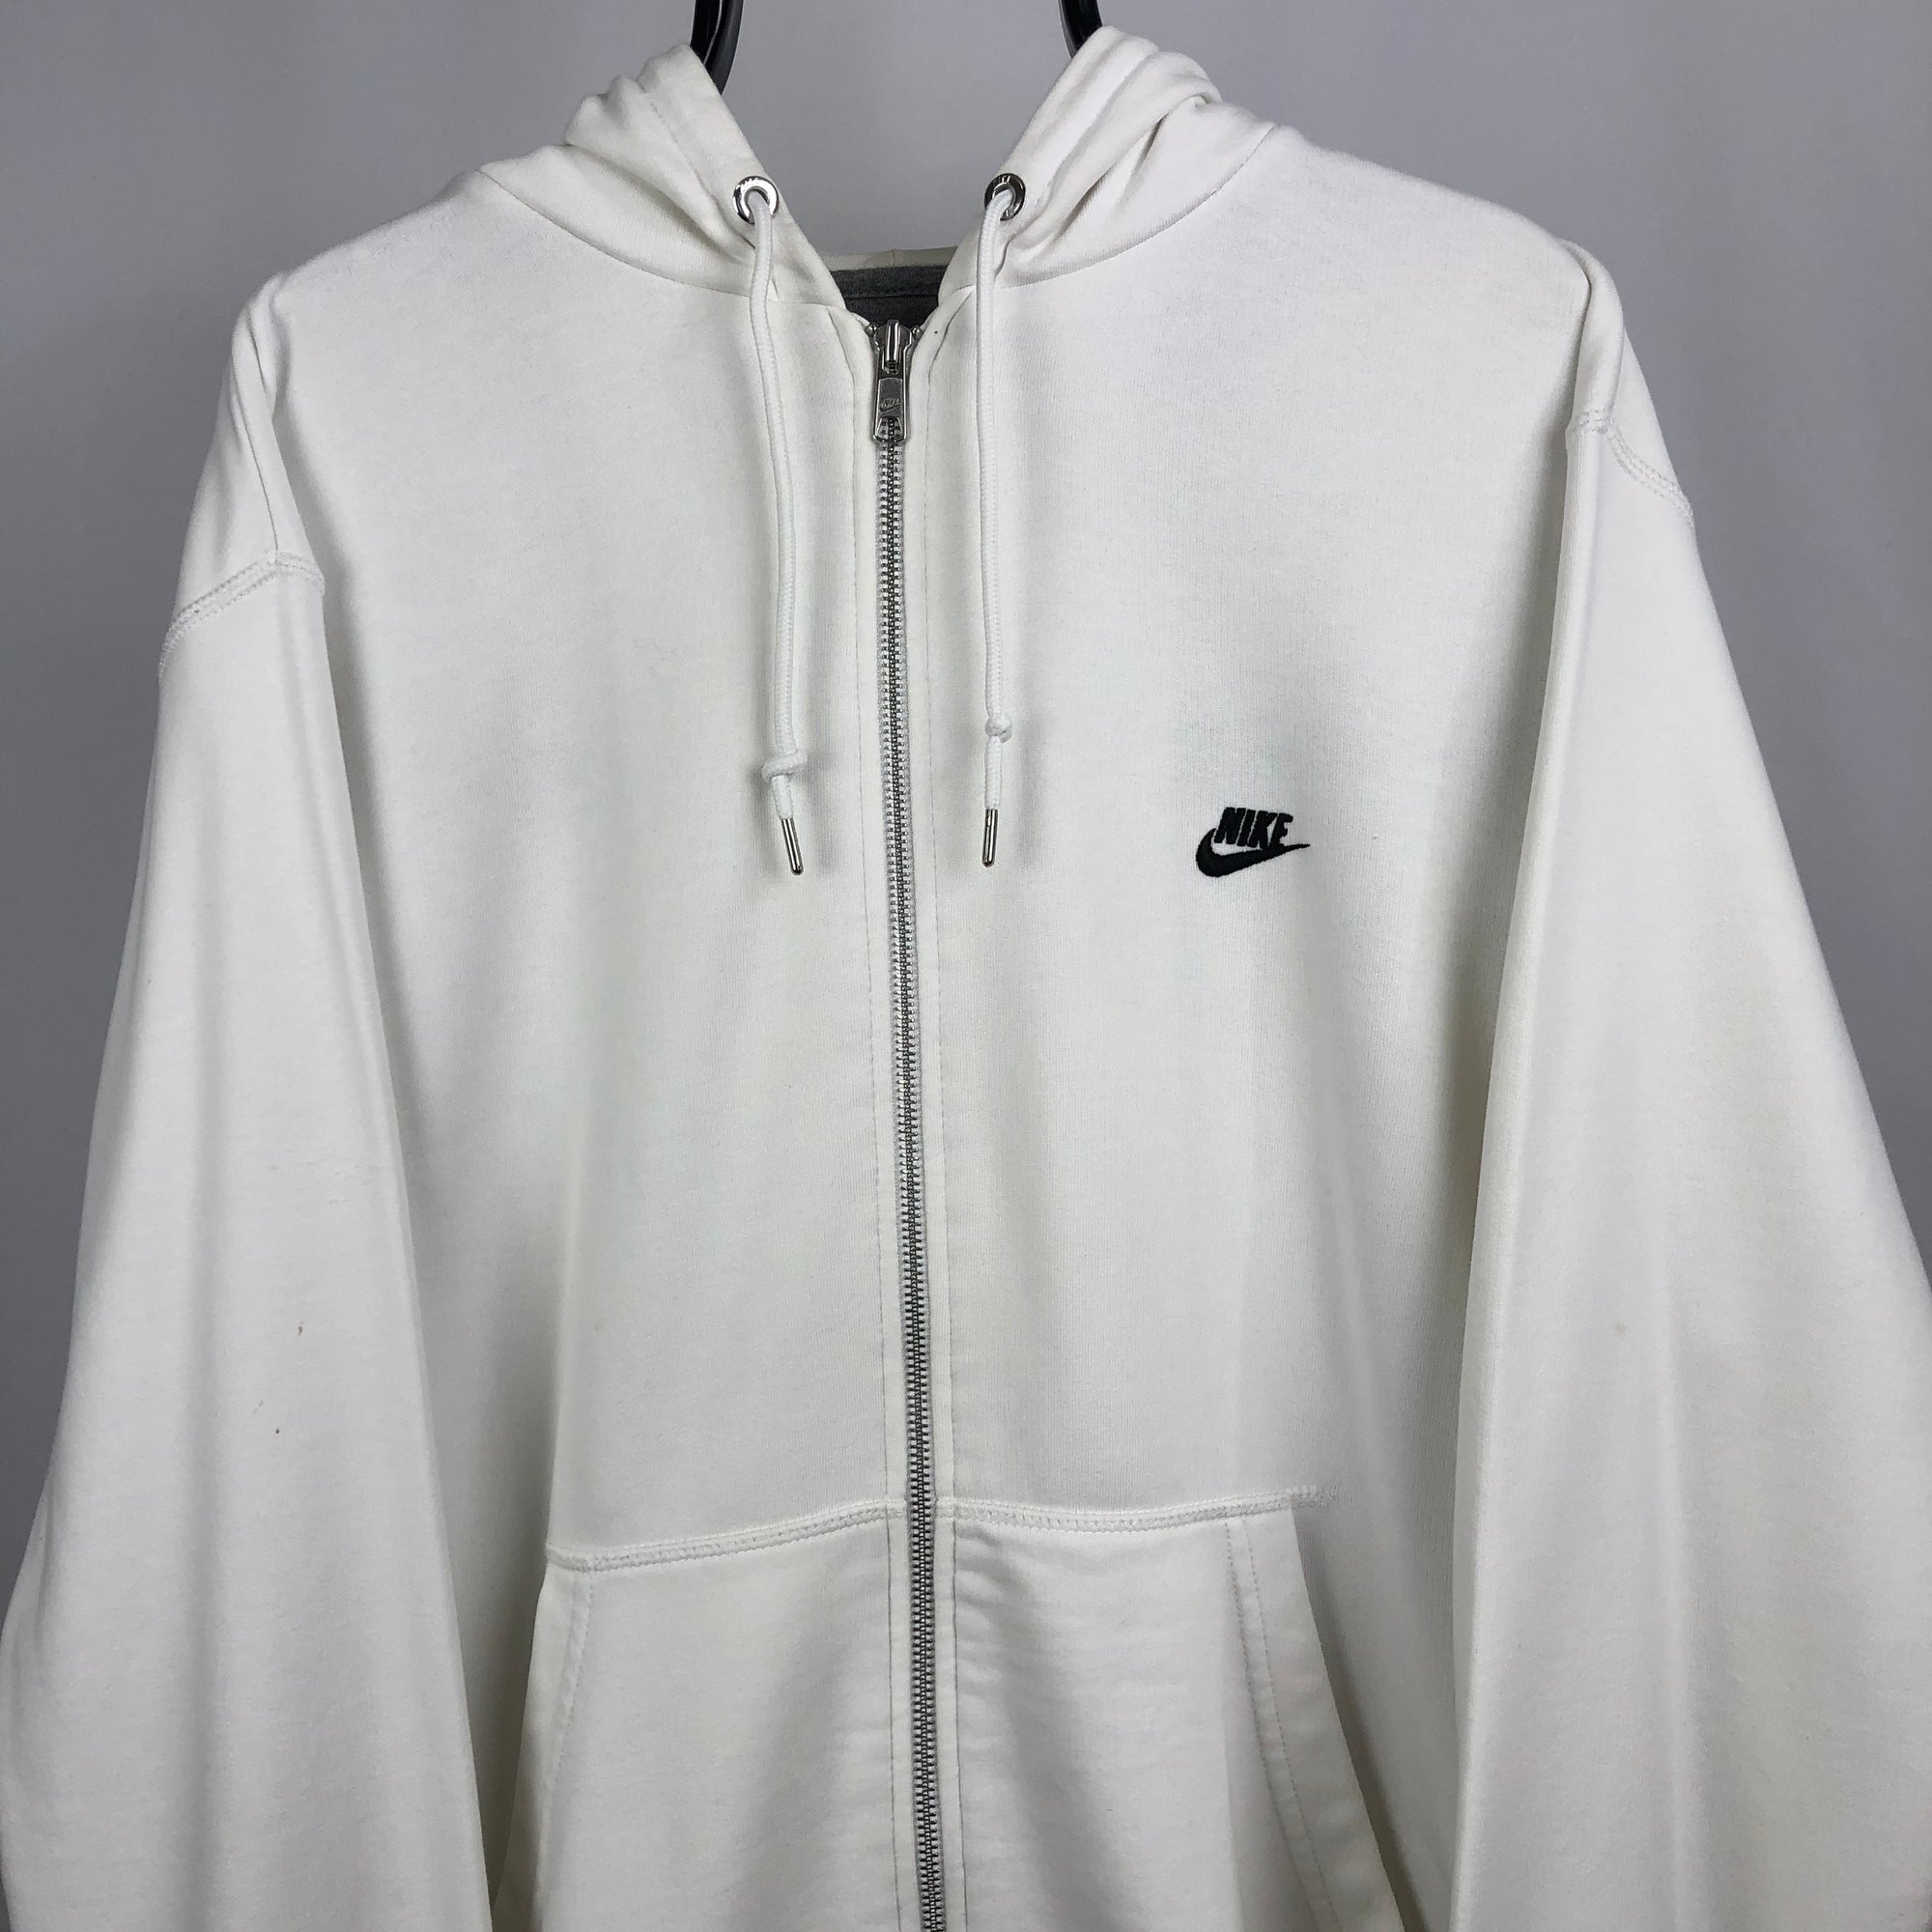 Nike Embroidered Small Logo Zip Hoodie in White - Men's Large/Women's XL